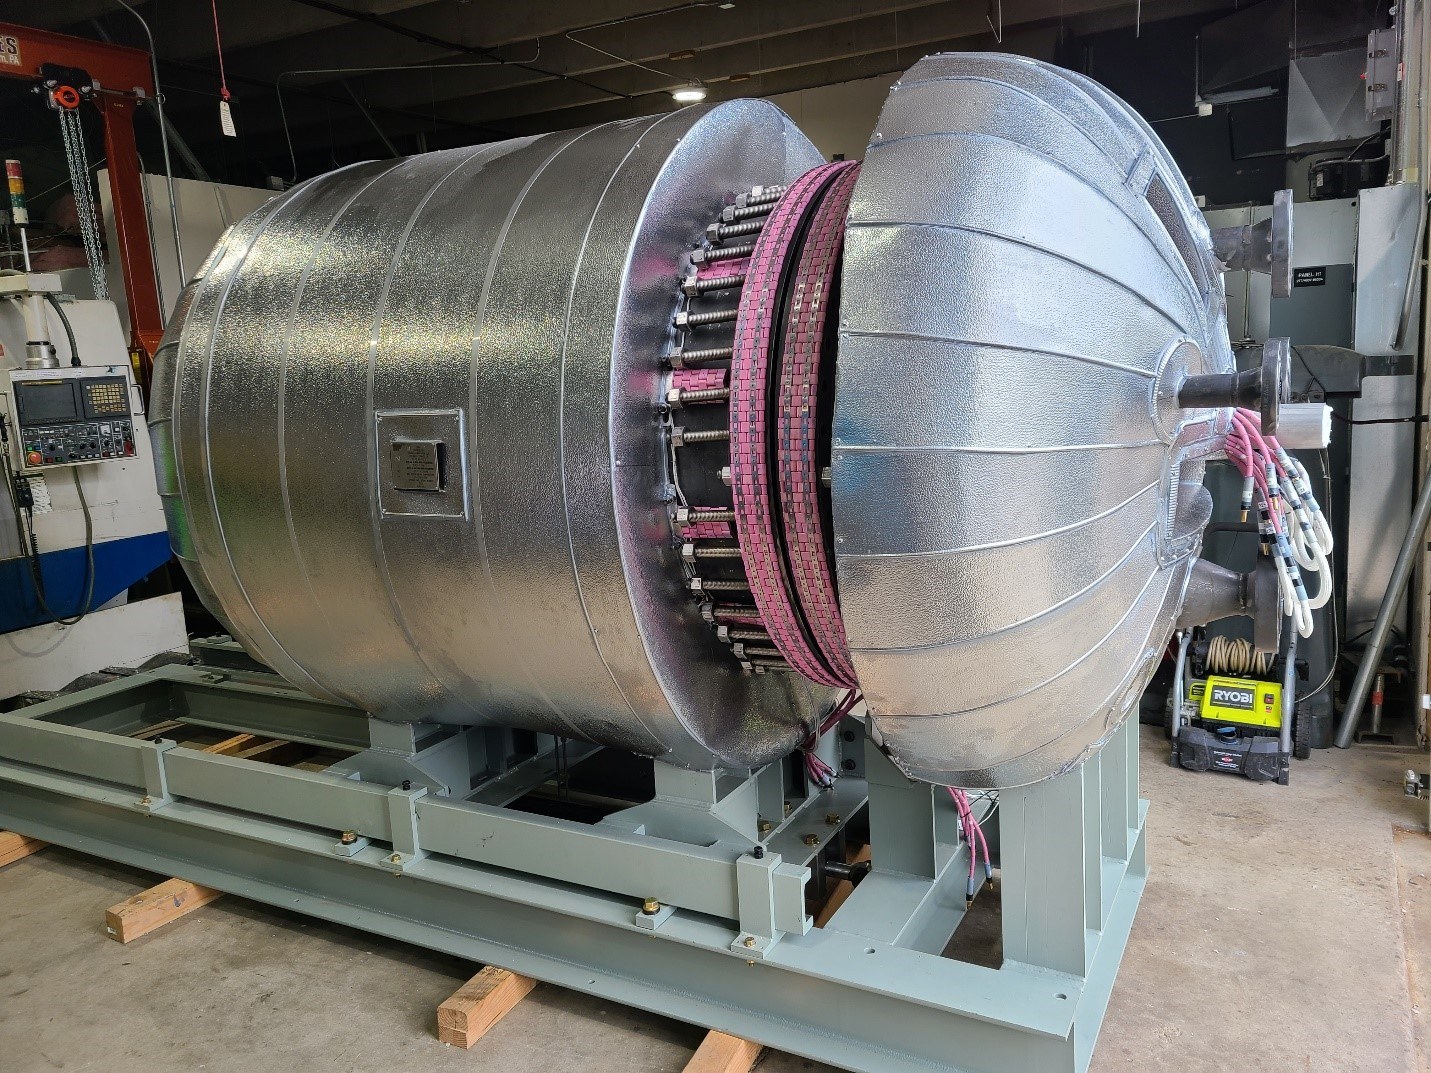 800°C at 2 bar Alloy 800H Pressure Vessel designed by Czero which contains the SOFC Stacks